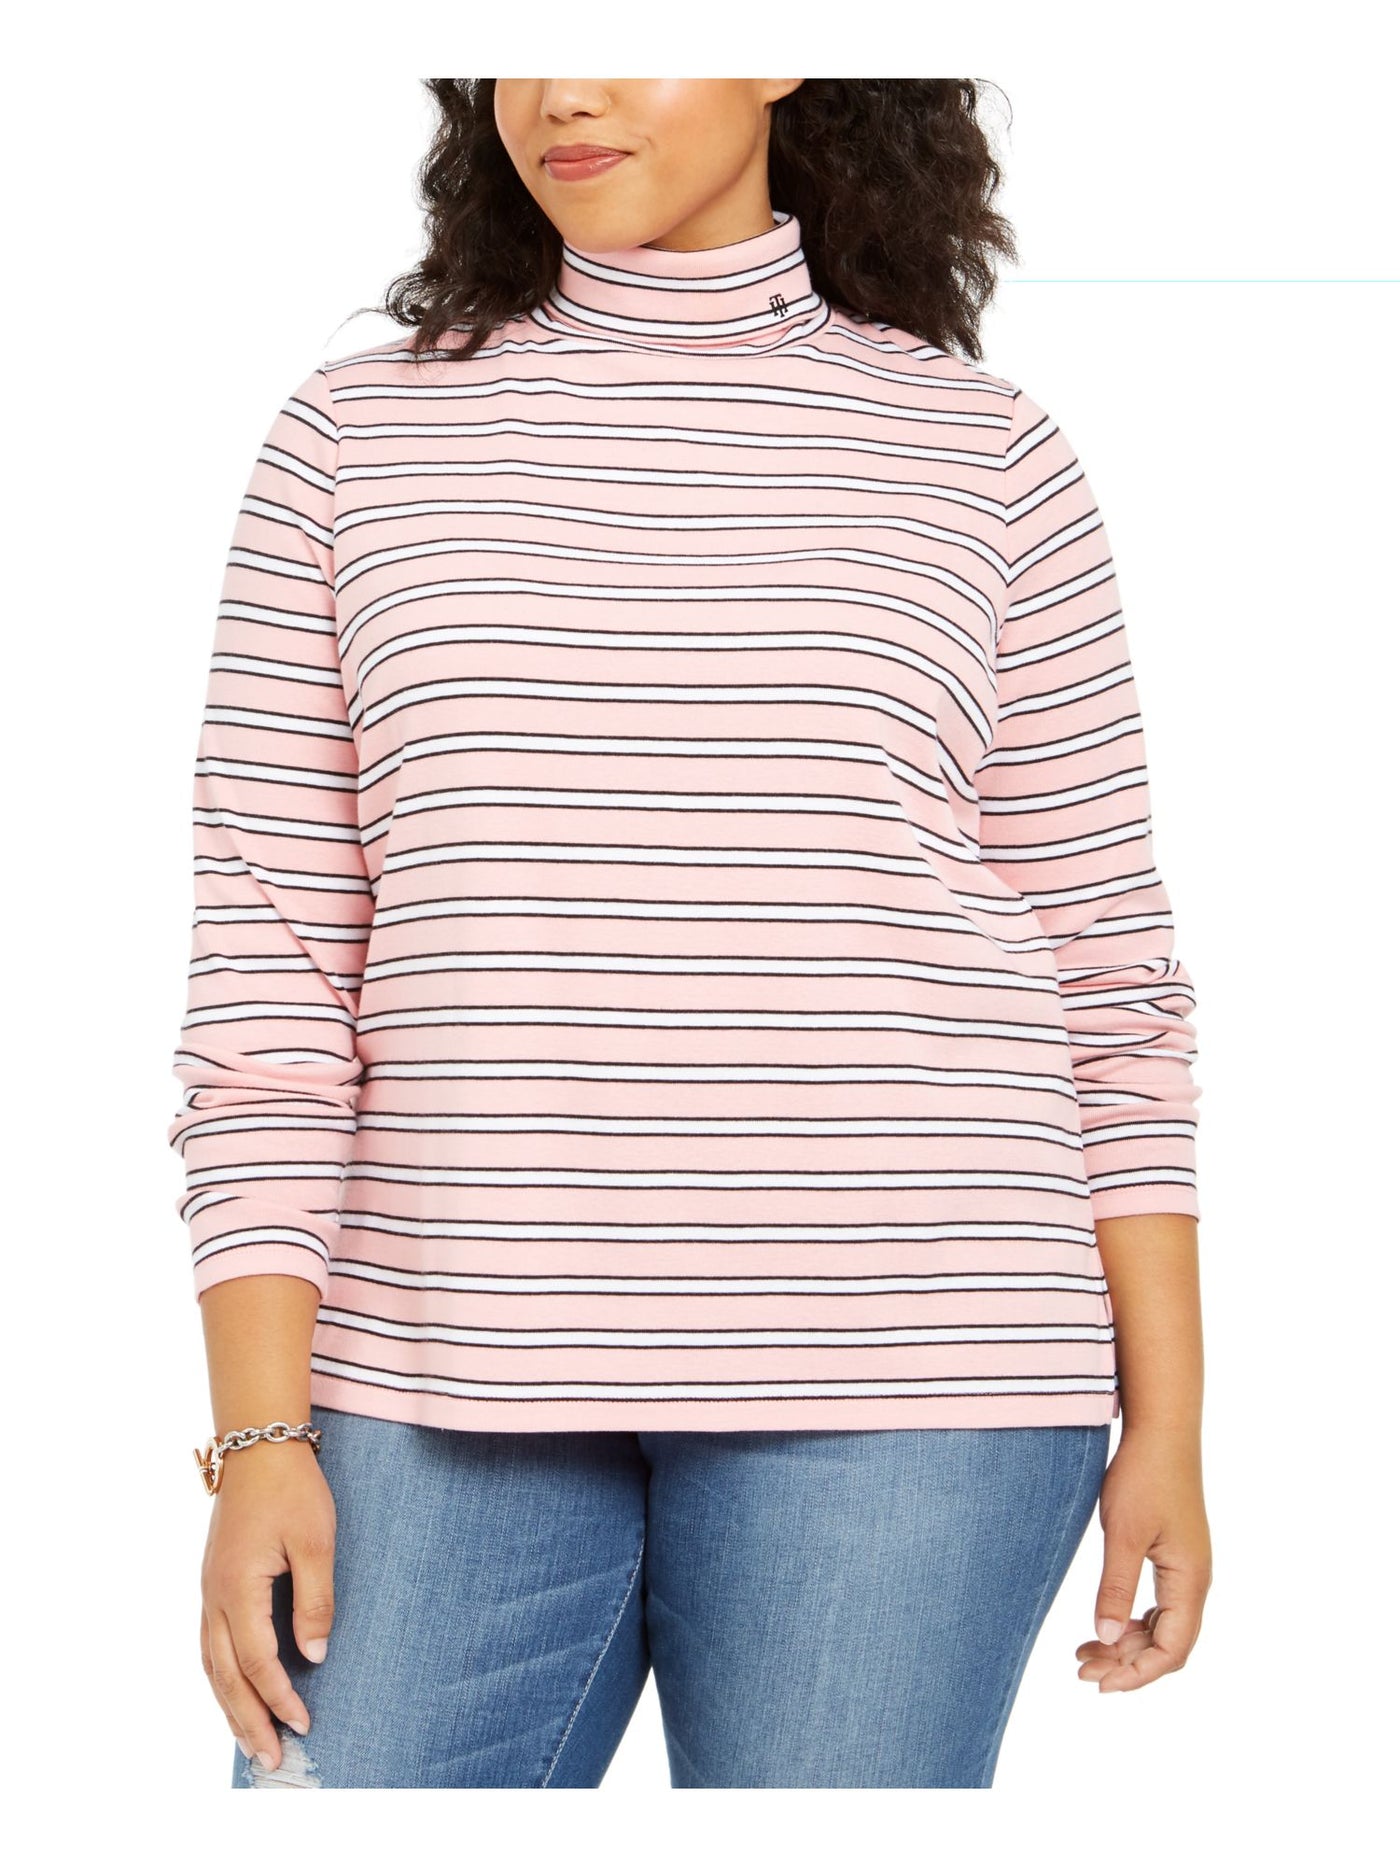 TOMMY HILFIGER Womens Pink Striped Long Sleeve Collared Blouse Plus 1X